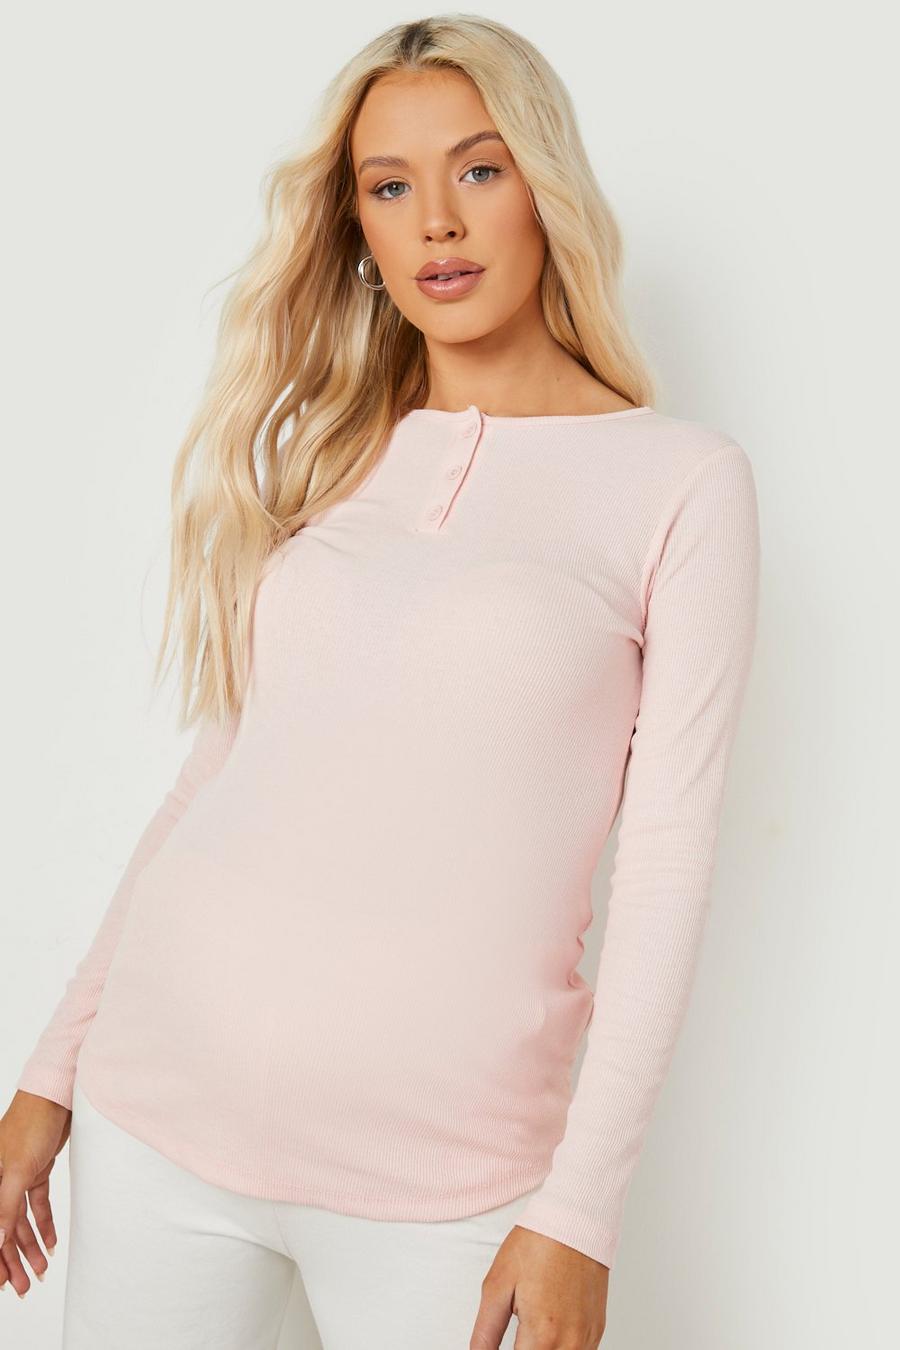 Blush pink Maternity Nursing Button Front Ruched T-shirt